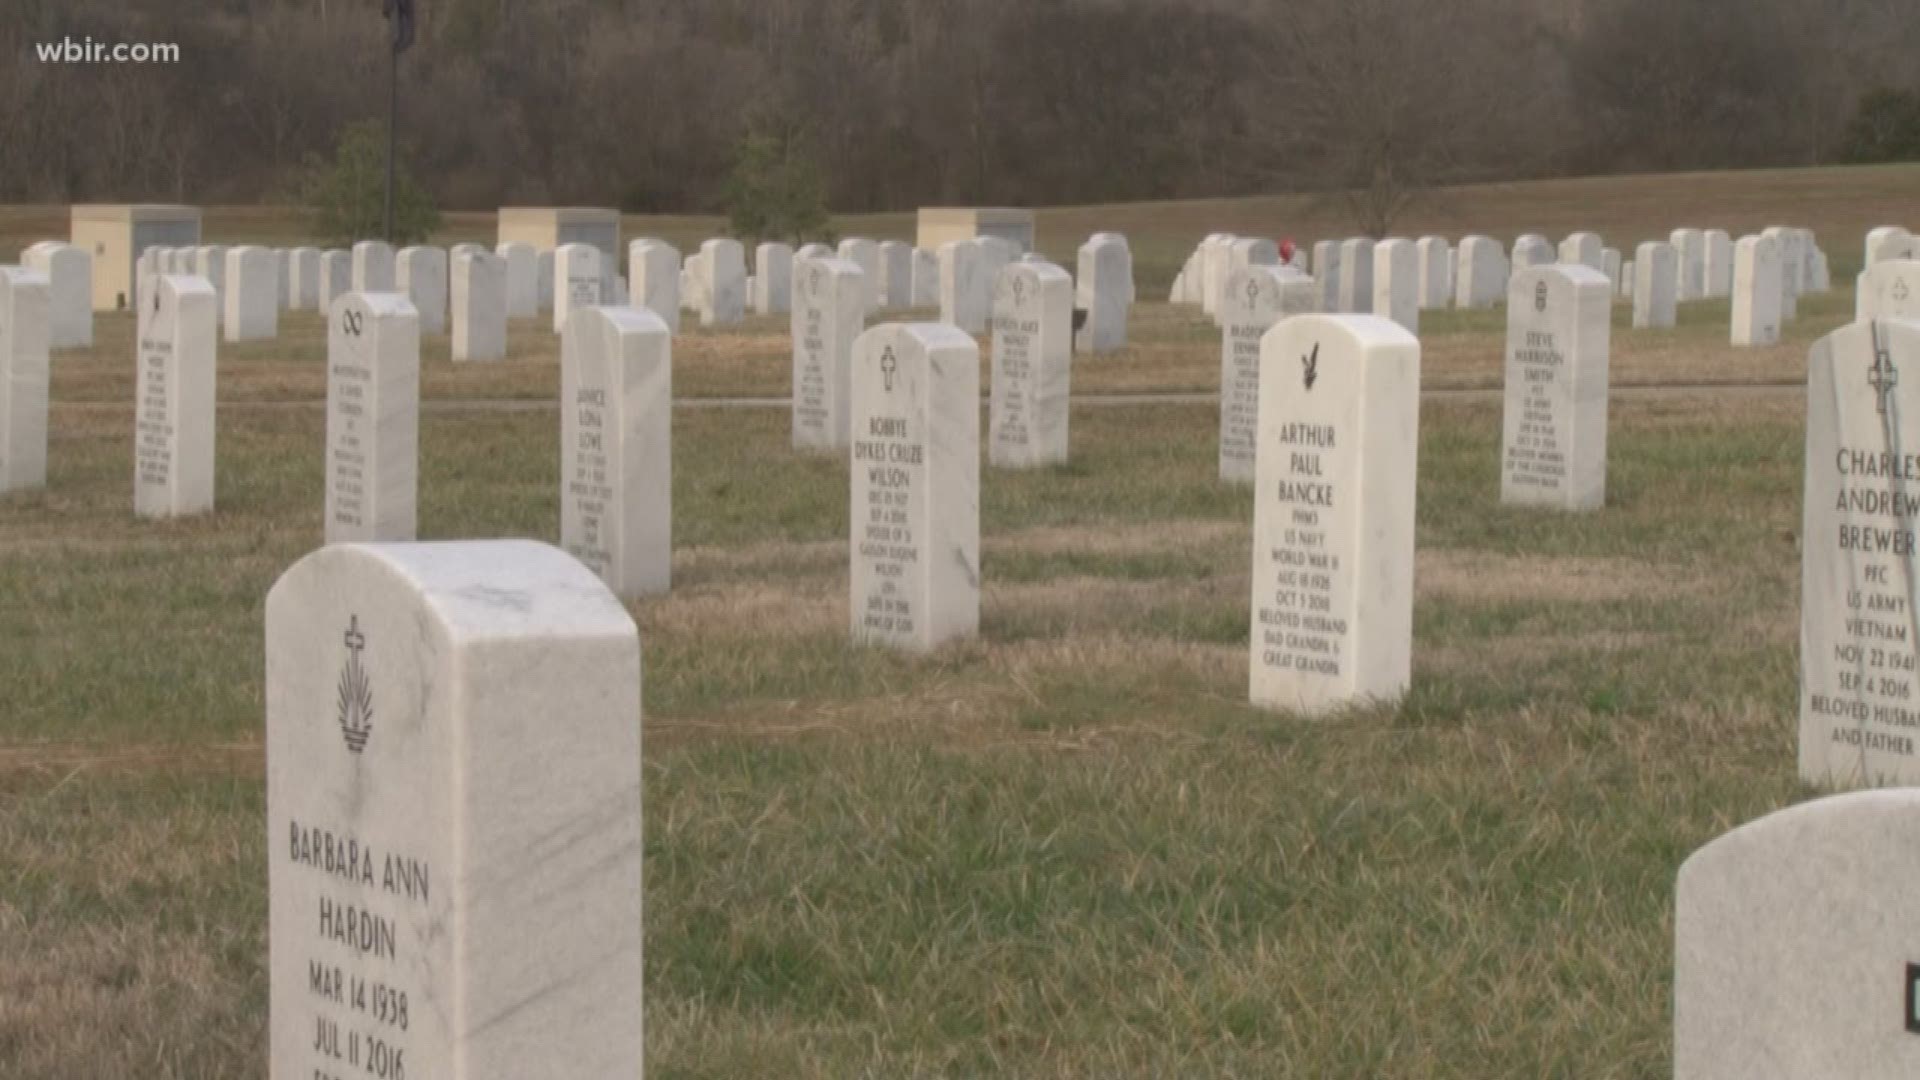 Tomorrow morning, volunteers will bury seven veterans who died without any family to claim them.